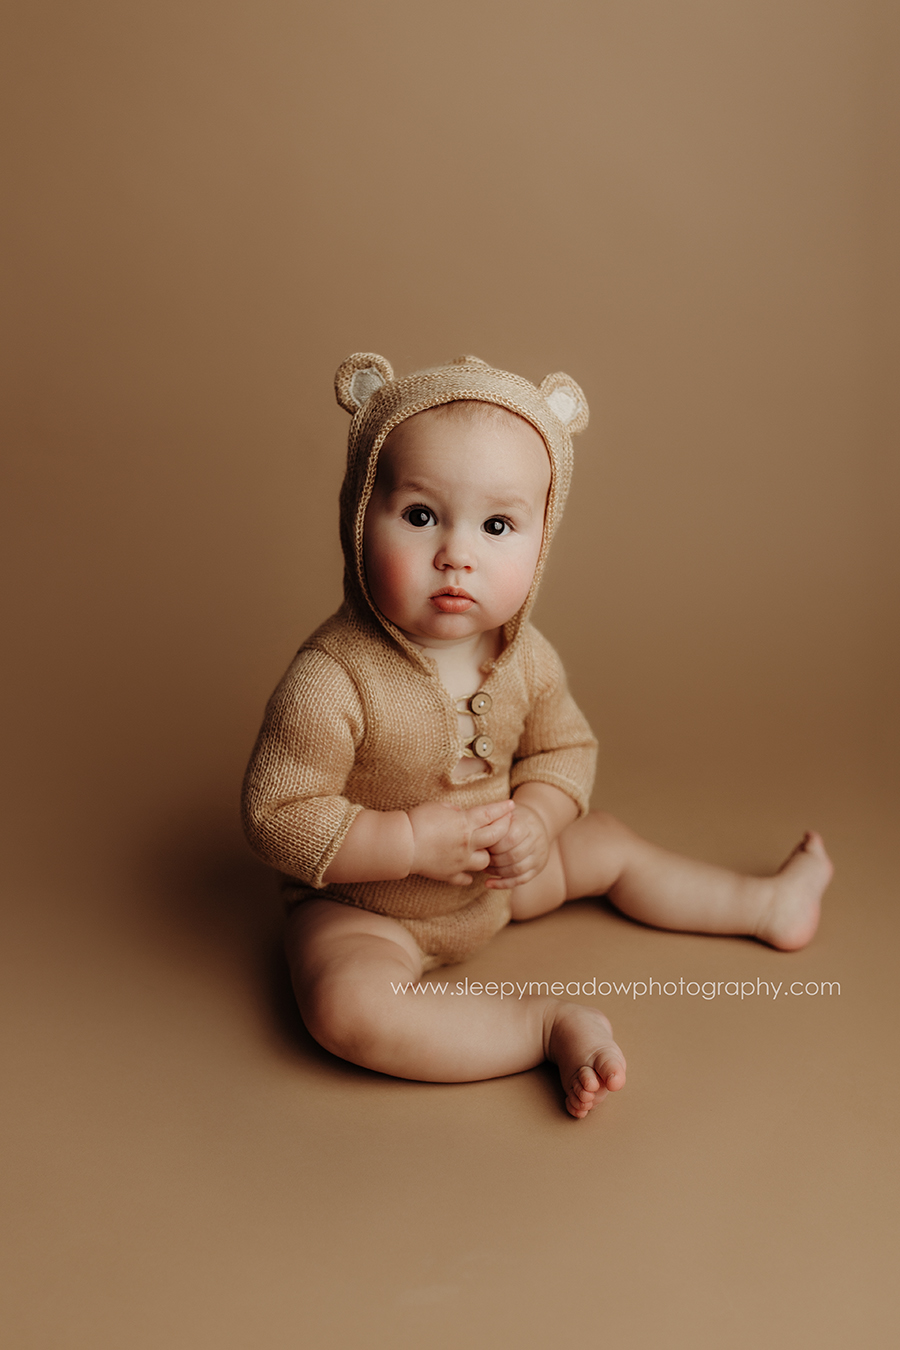 Teddy bear themed photo shoot for 6 month baby.